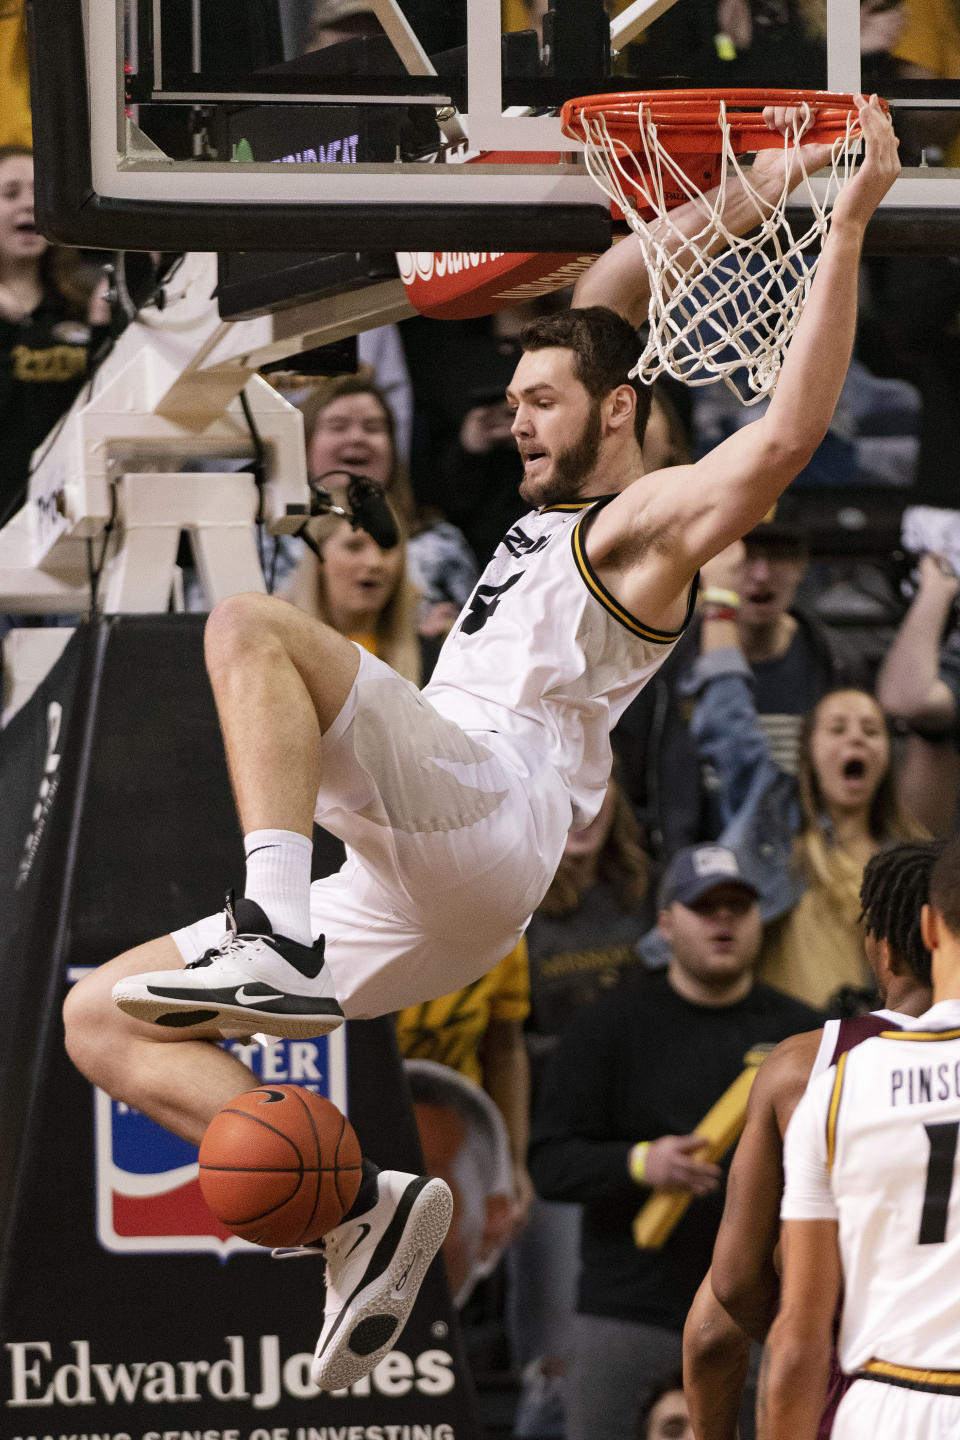 Missouri's Reed Nikko dunks the ball during the first half of an NCAA college basketball game against Mississippi State Saturday, Feb. 29, 2020, in Columbia, Mo. (AP Photo/L.G. Patterson)